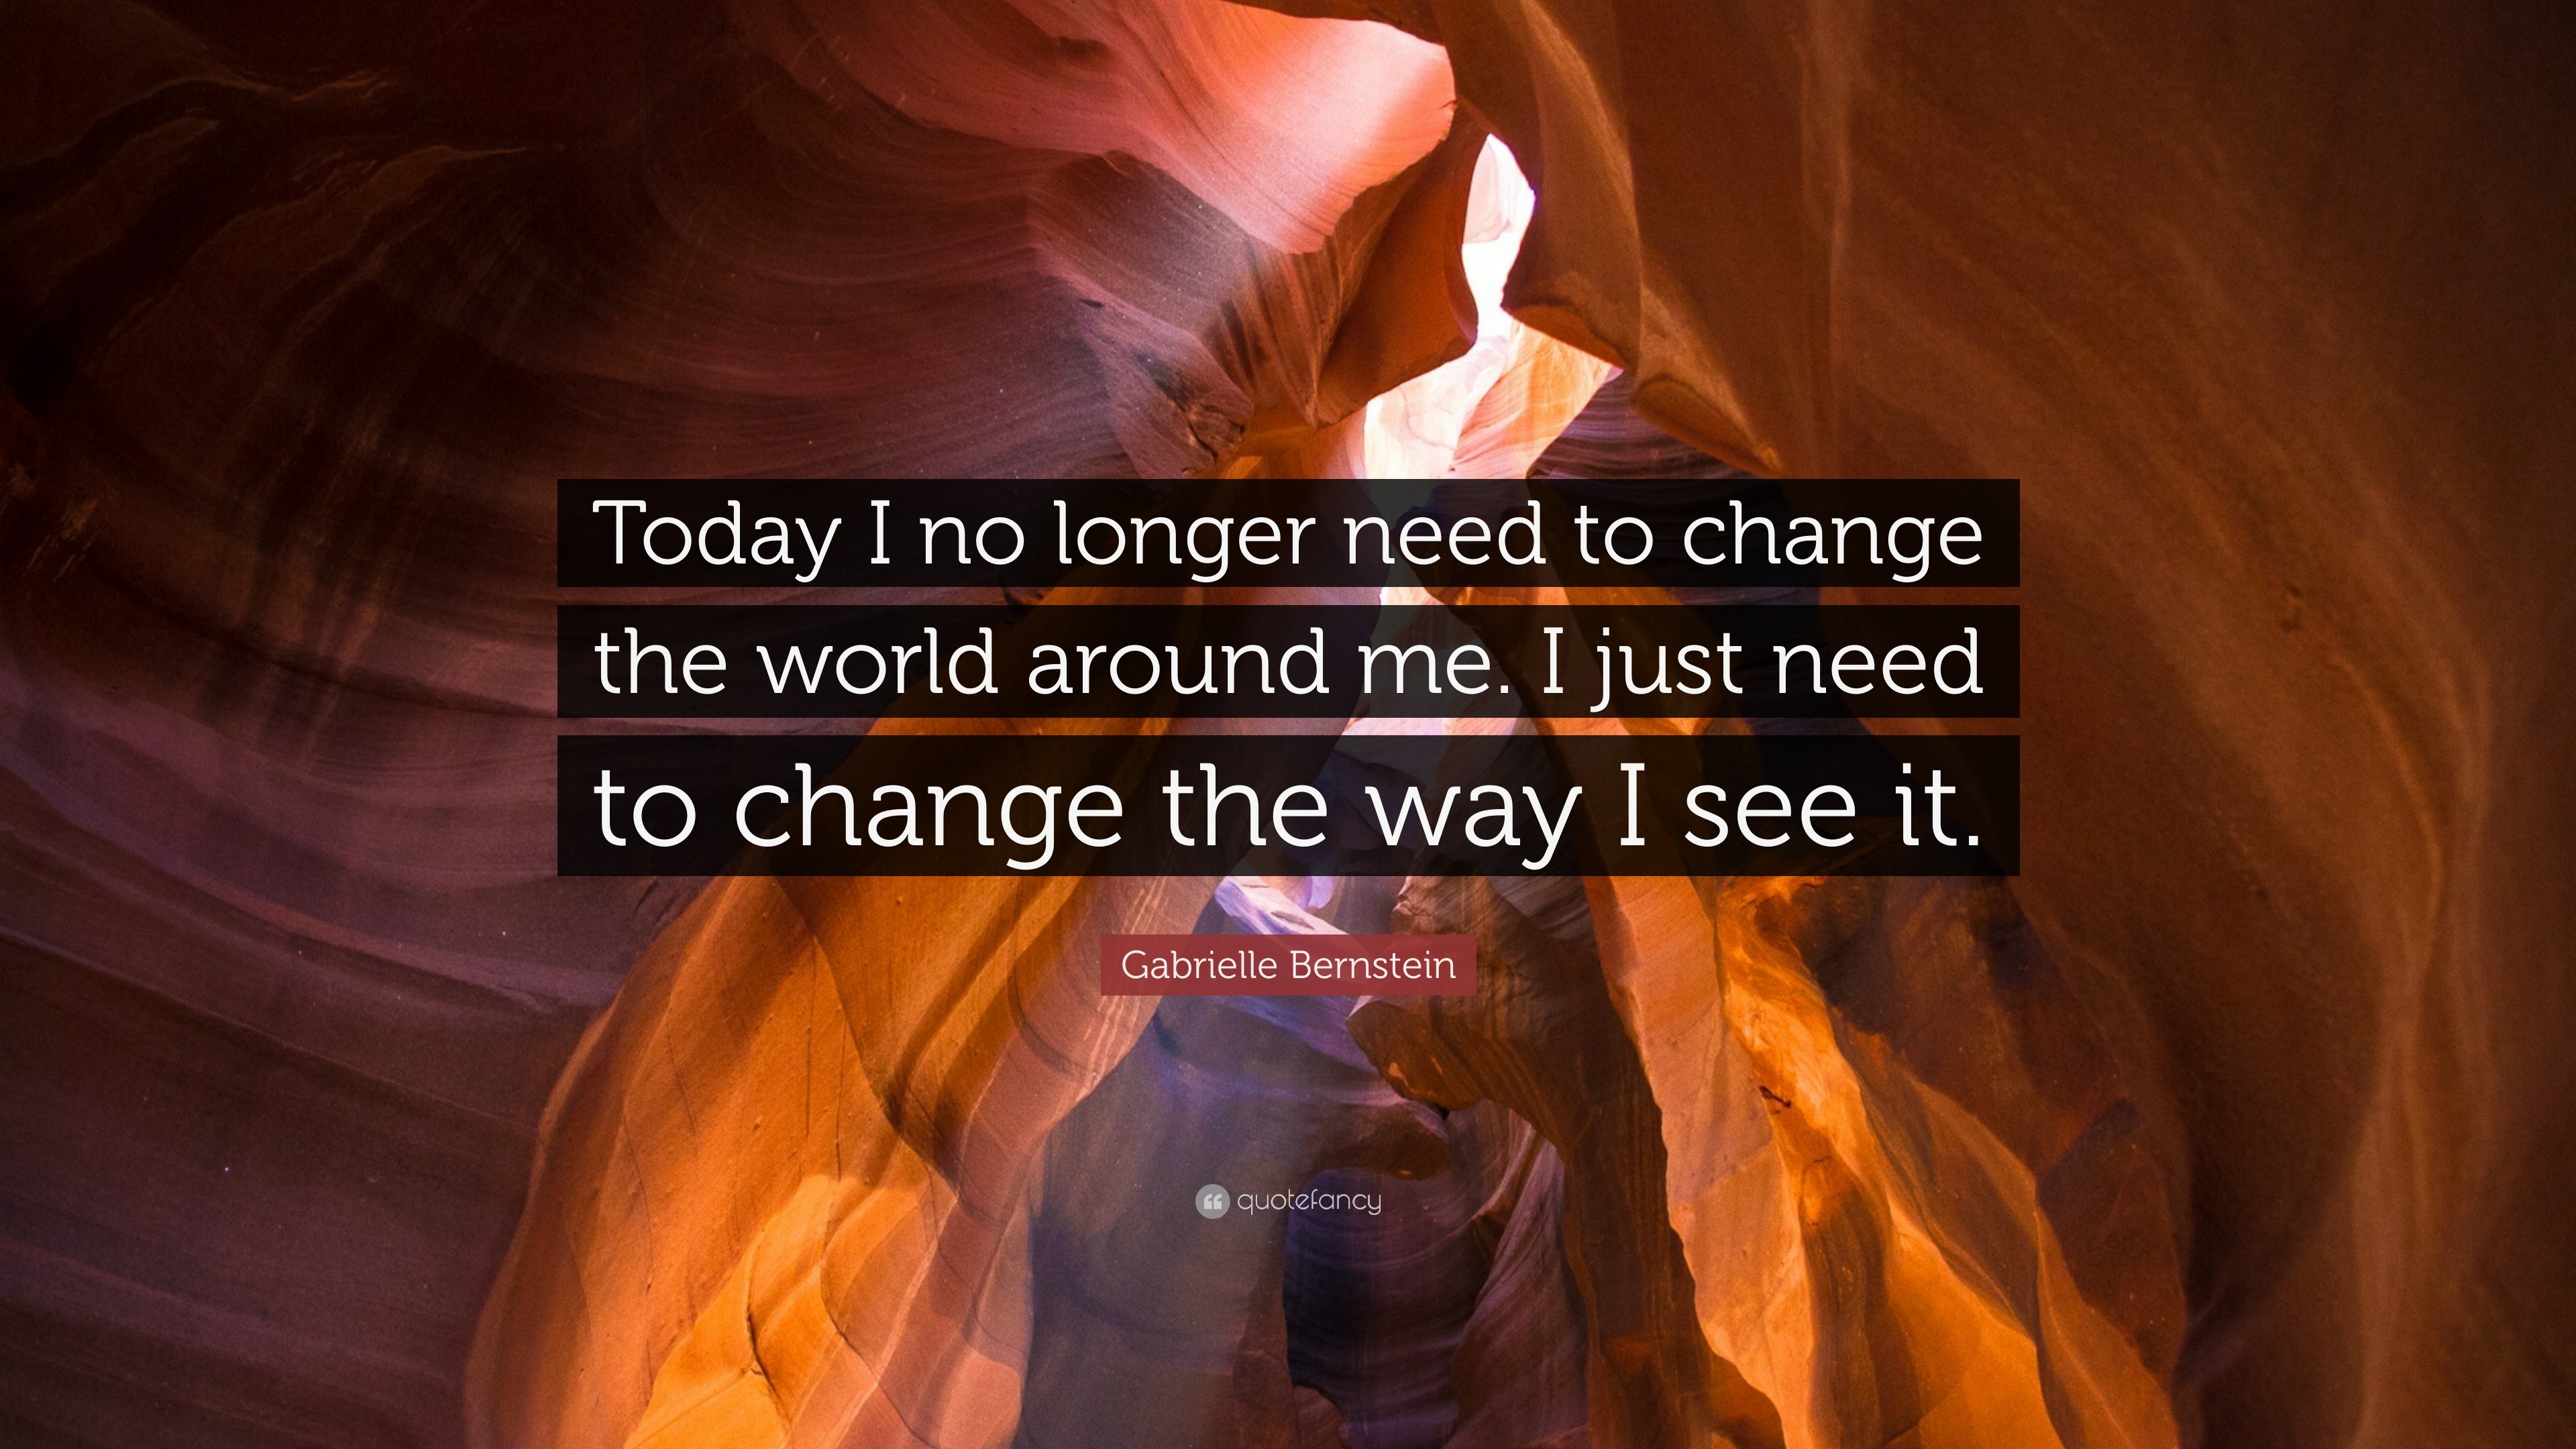 Gabrielle Bernstein Quote: “Today I no longer need to change the world